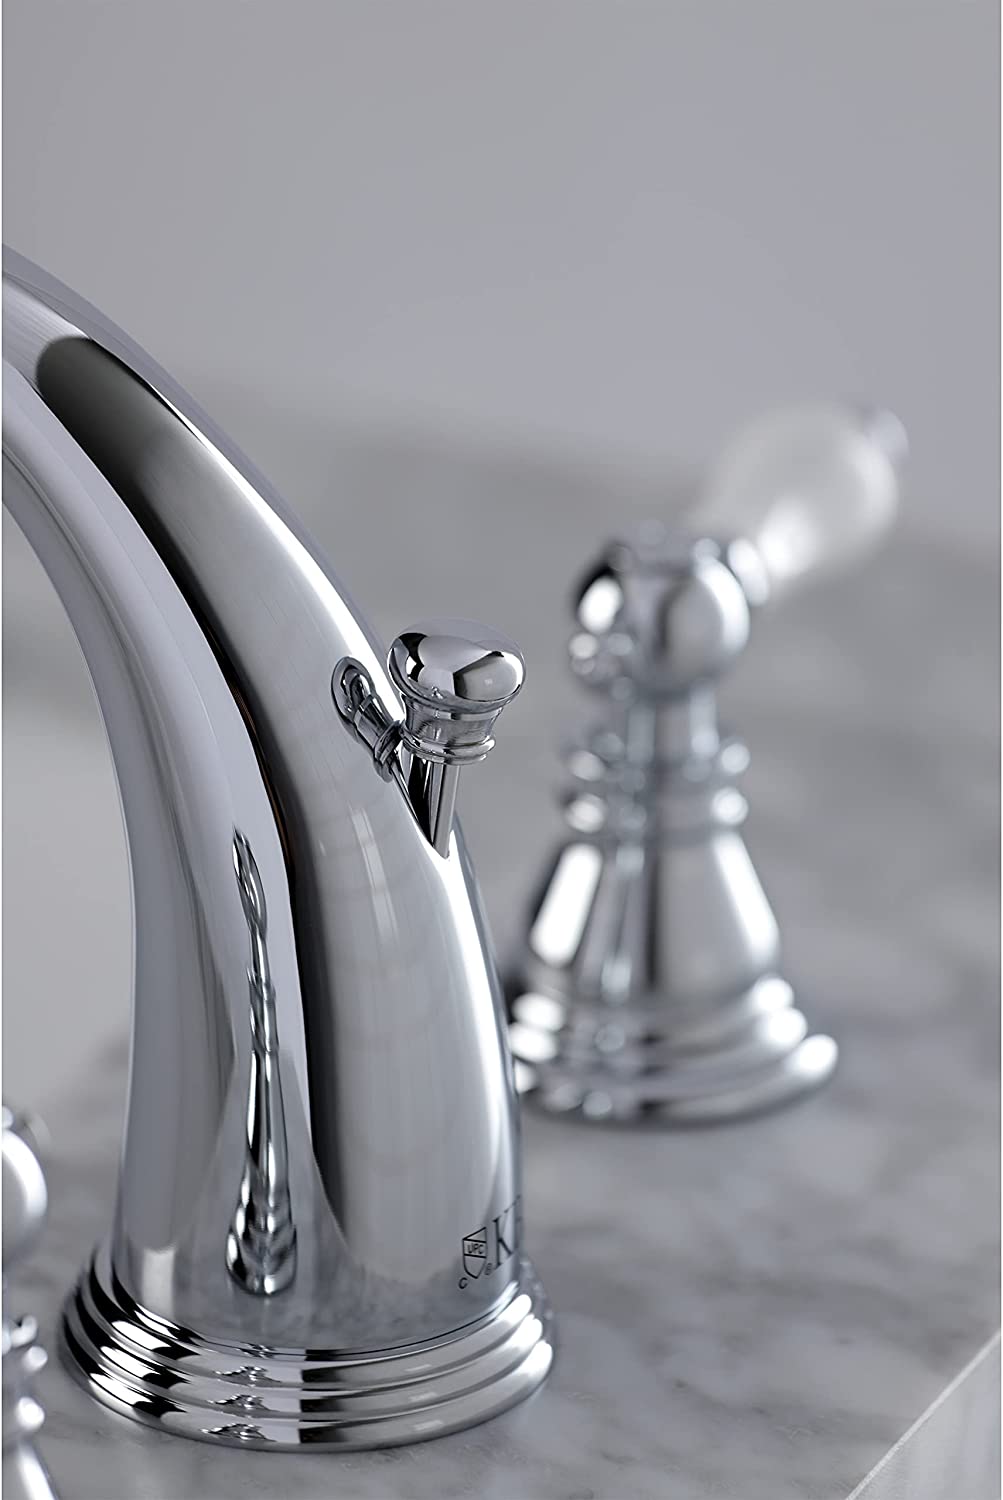 Kingston Brass KB981APL American Patriot Widespread Bathroom Faucet, Polished Chrome